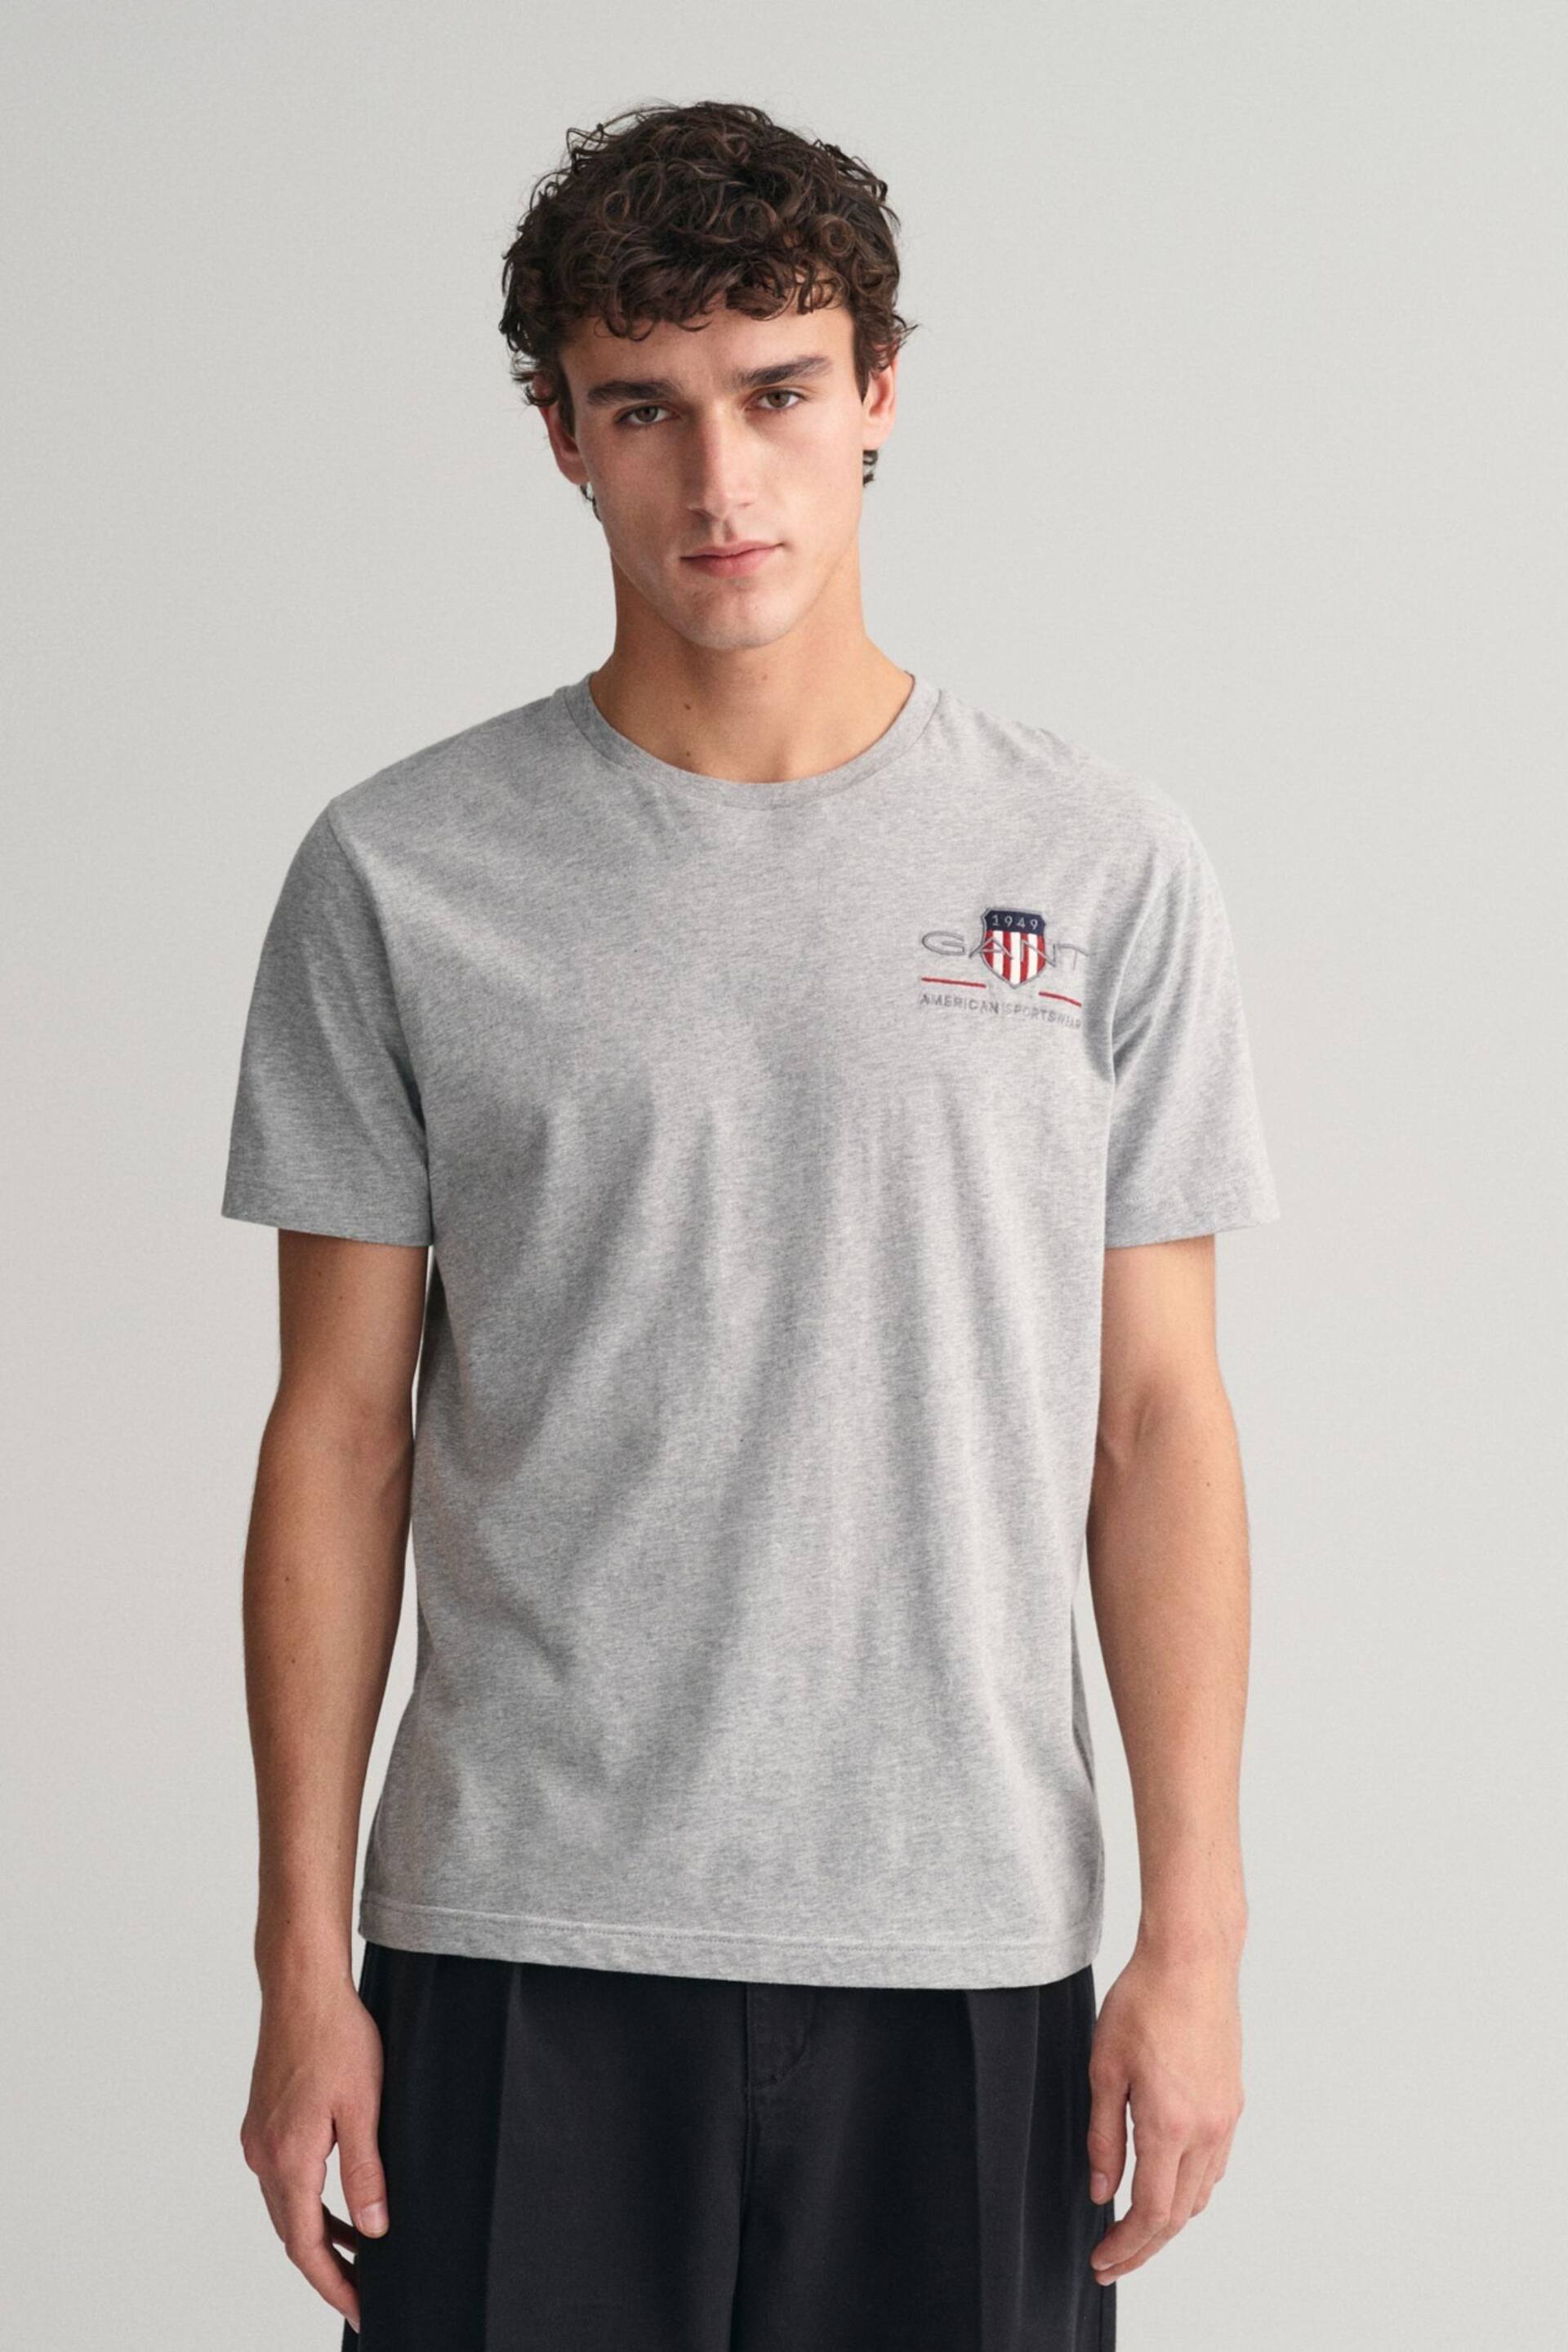 GANT Embroidered Archive Shield T-Shirt - Image 1 of 5